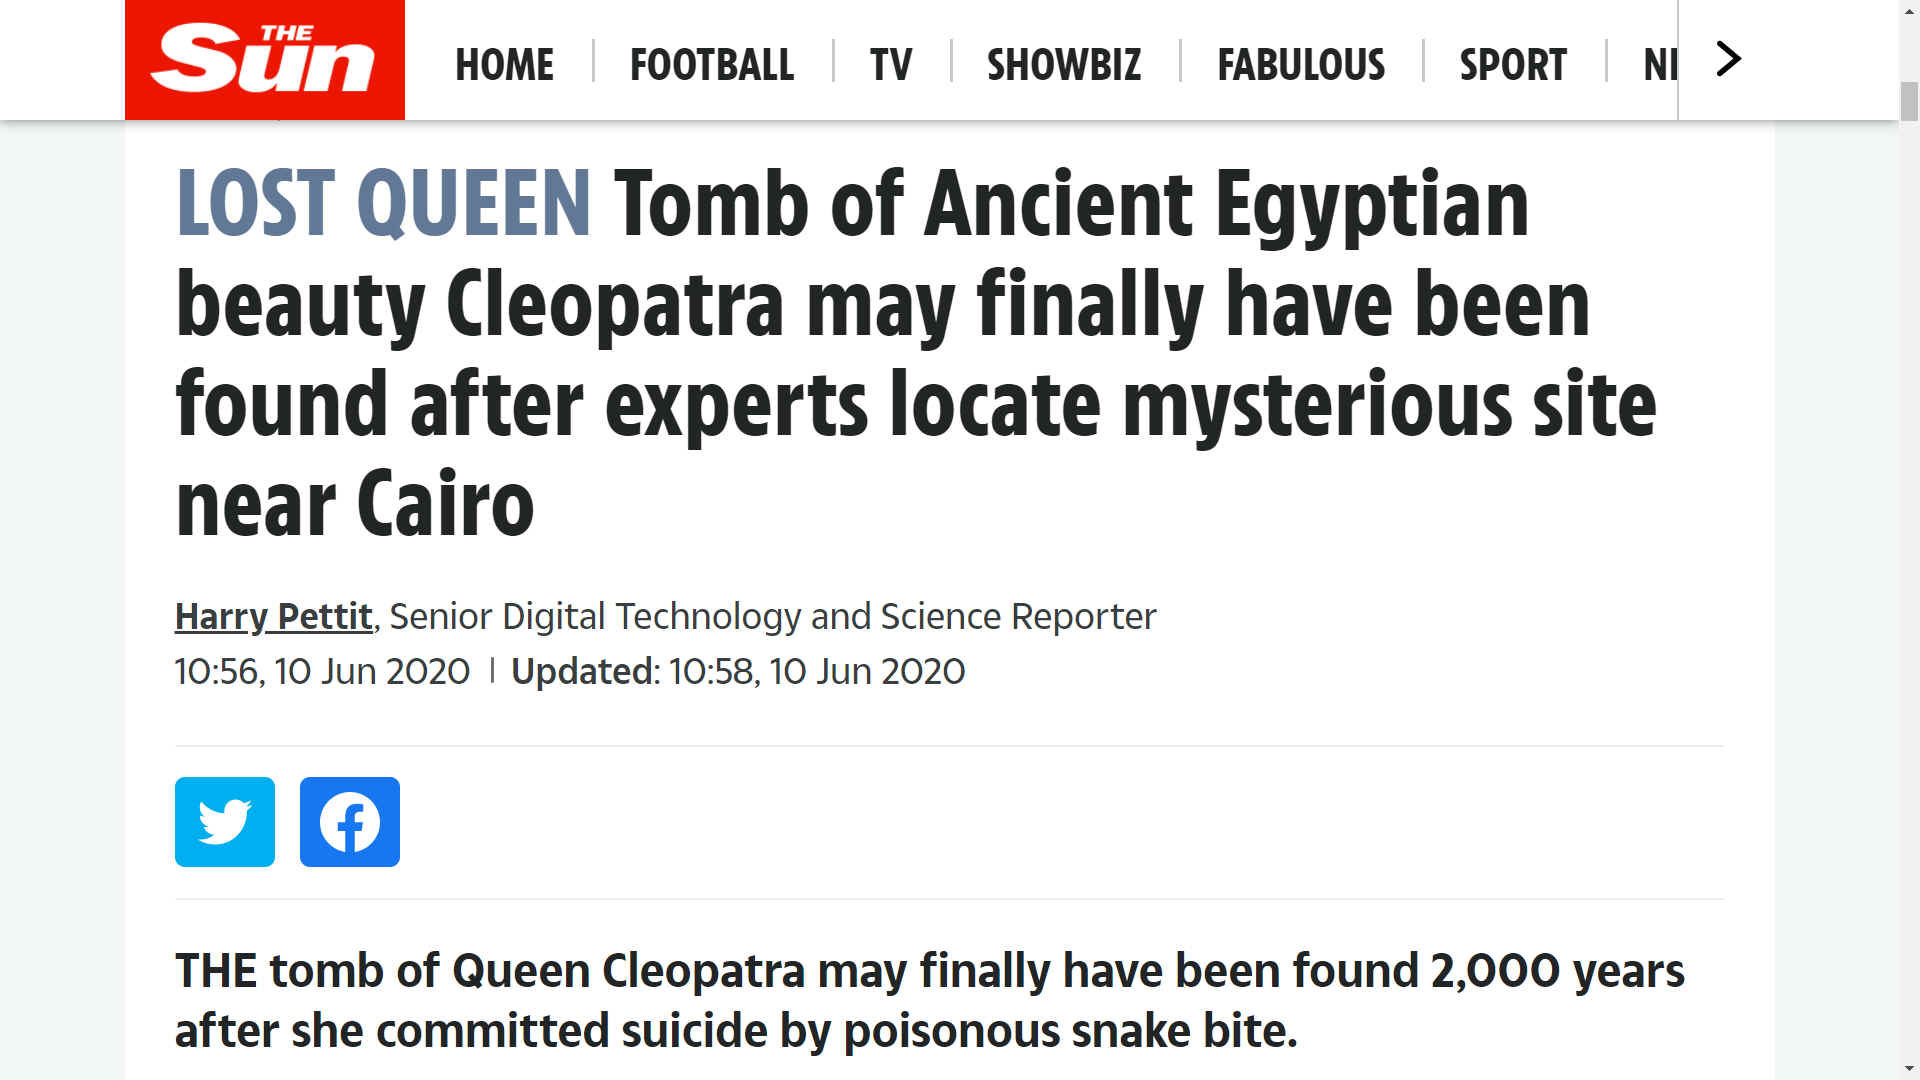 The Sun June 2020 latest news Cleopatra's tomb is still undiscovered